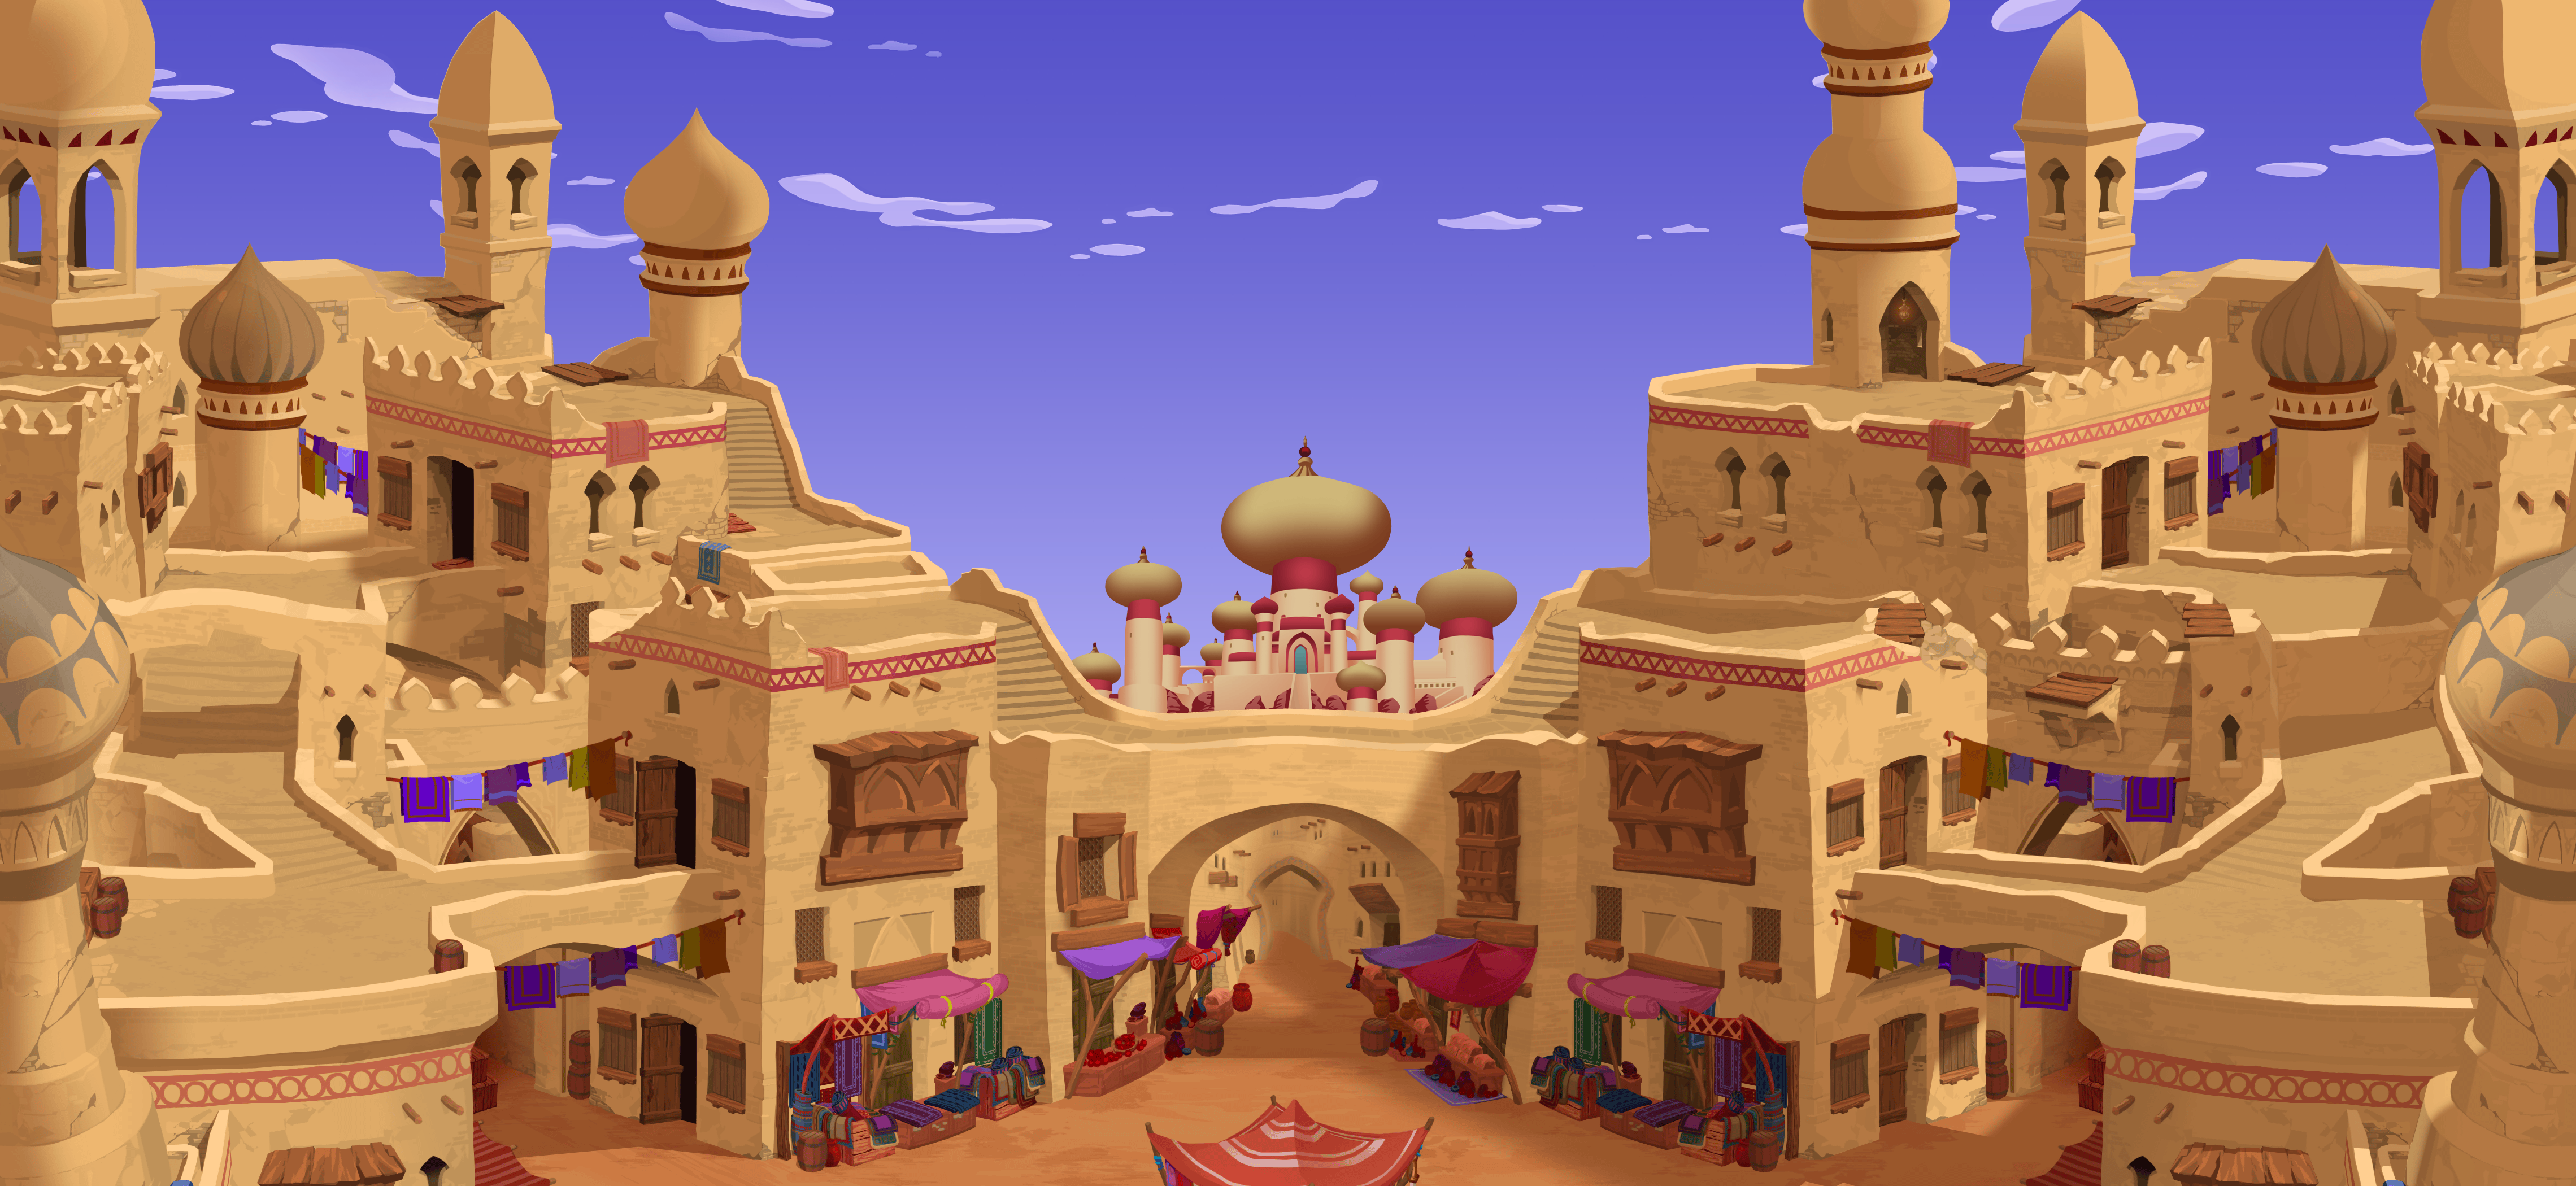 Agrabah With Image Aladdin Episode Interactive Background